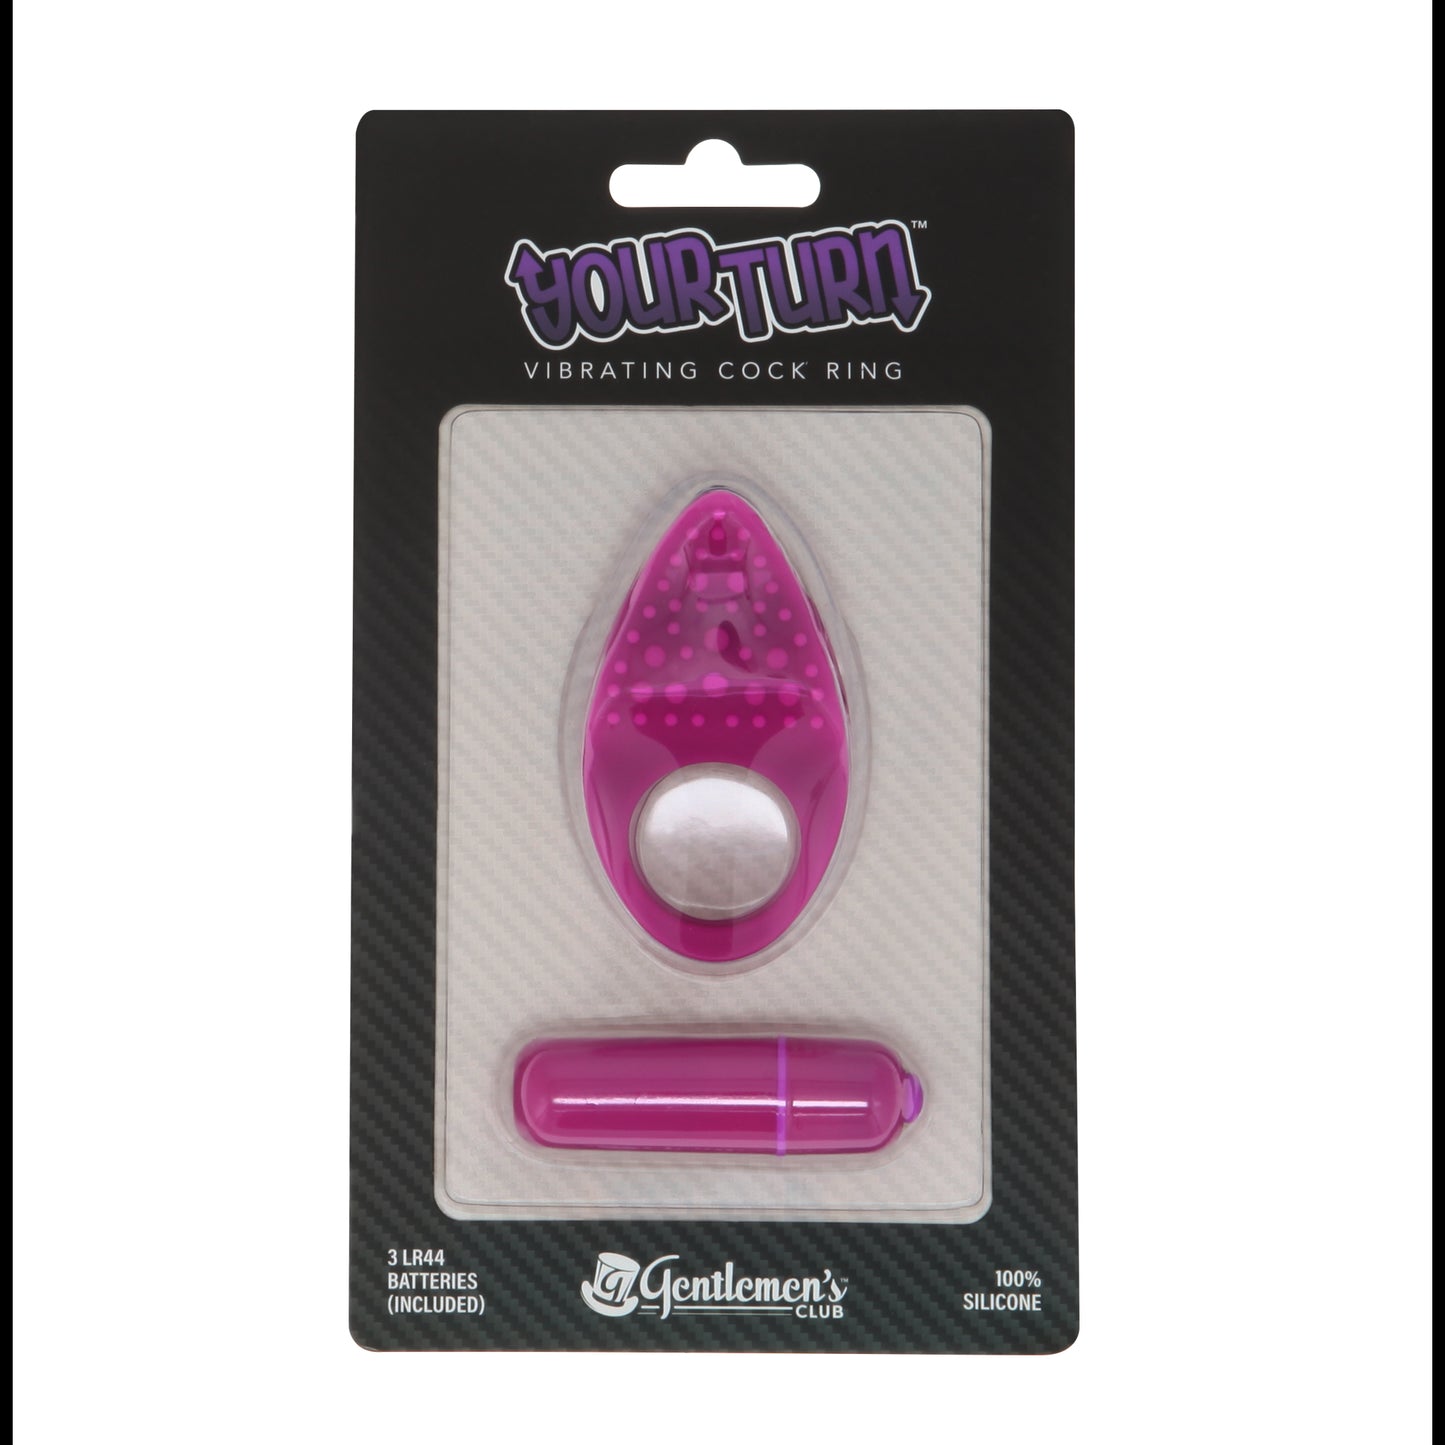 Vibrating Combo Cock Ring and Finger Vibe - Your Turn